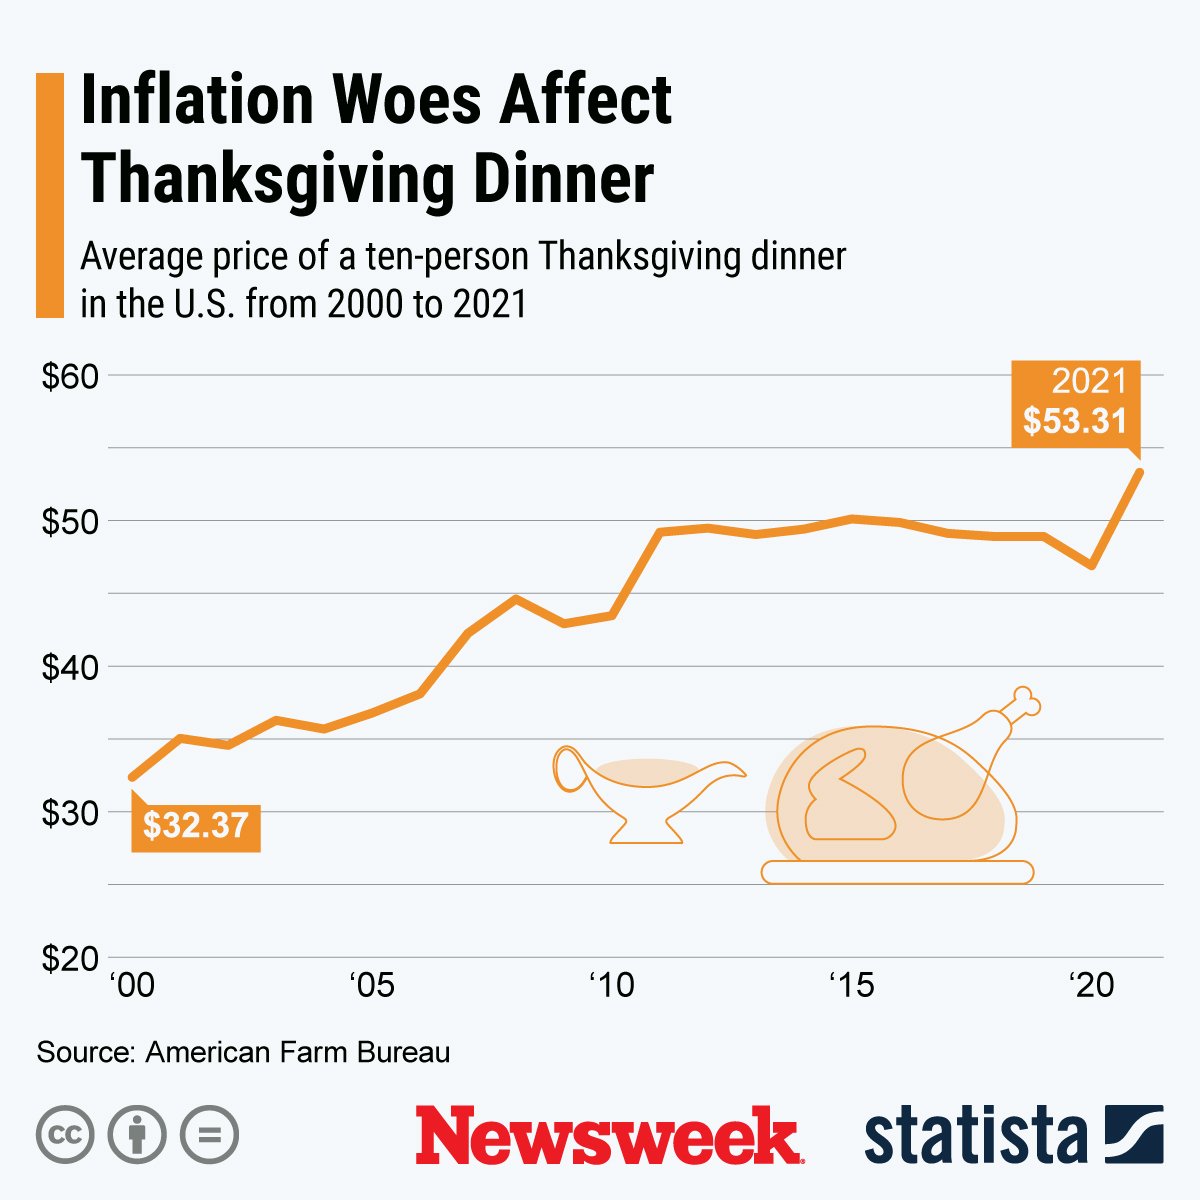 Graphic showing inflation impact on Thanksgiving.